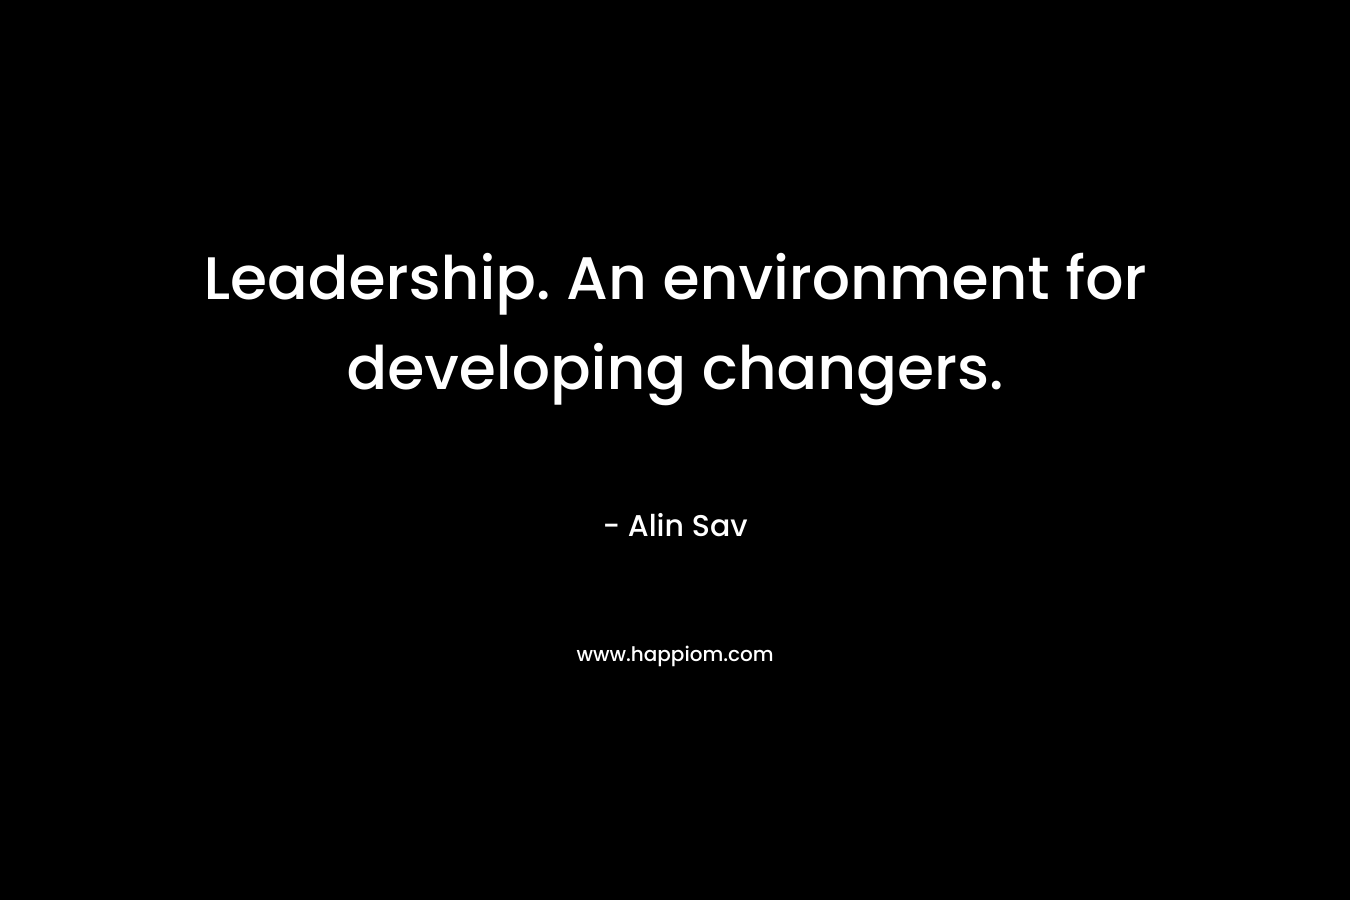 Leadership. An environment for developing changers.